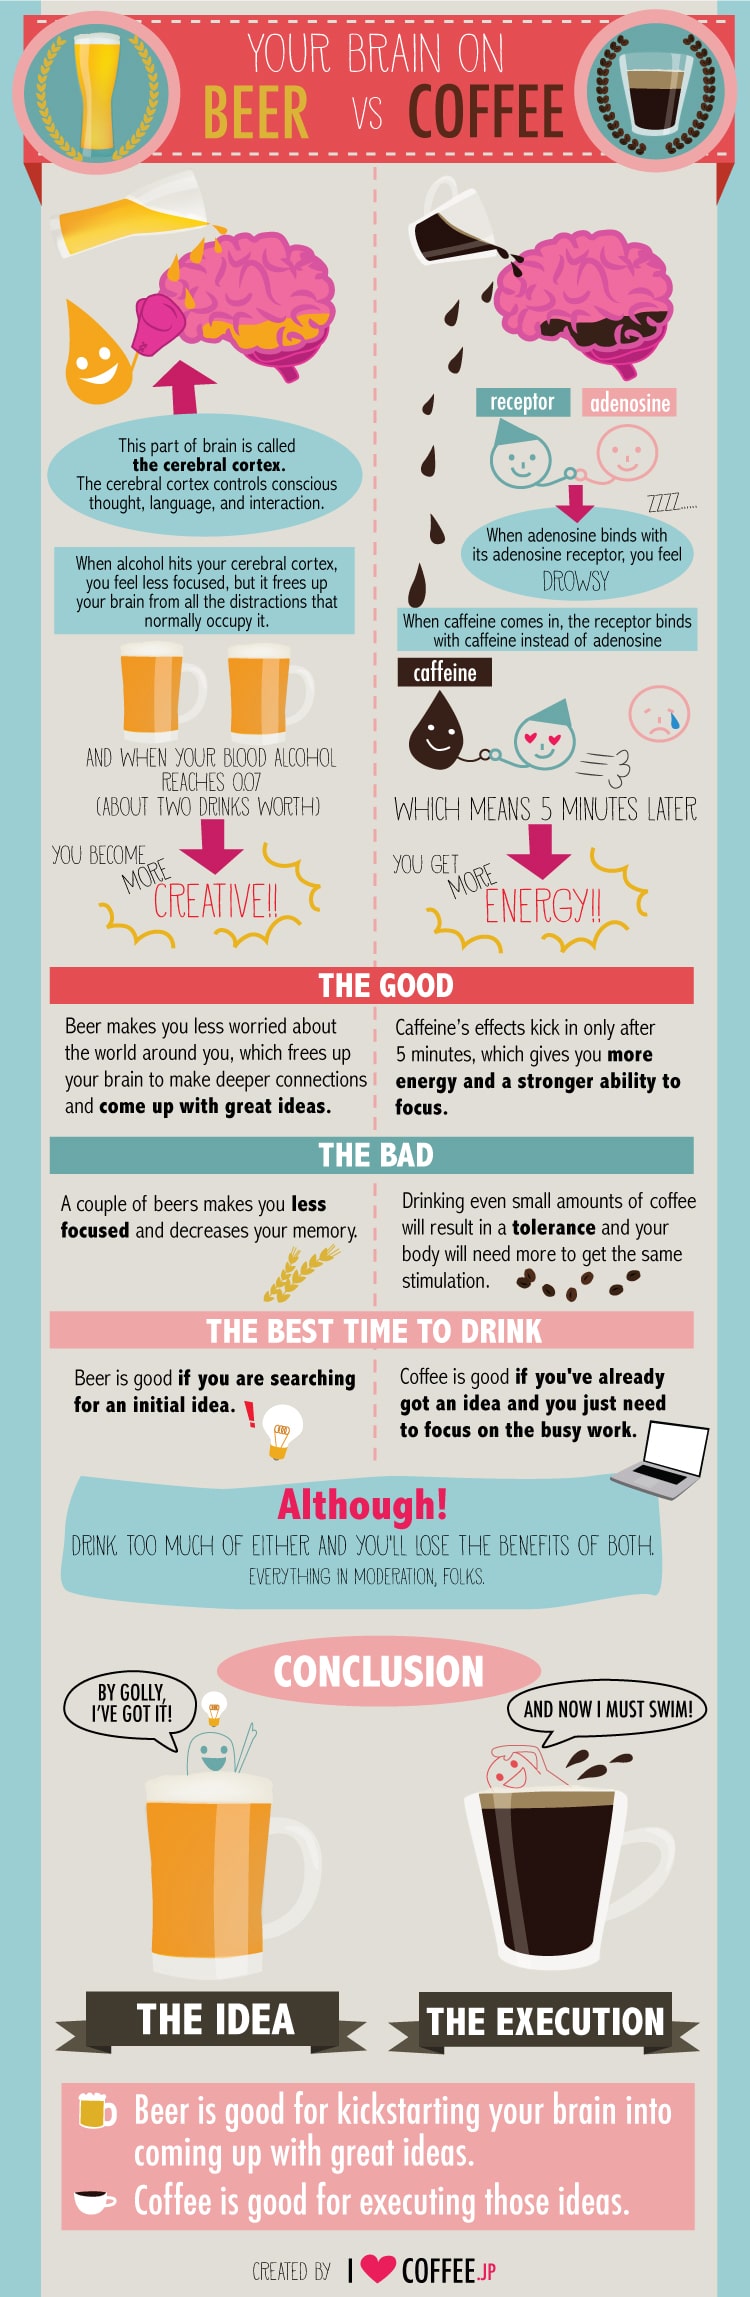 Beer vs. Coffee: See Which One Sparks More Creativity [Infographic]